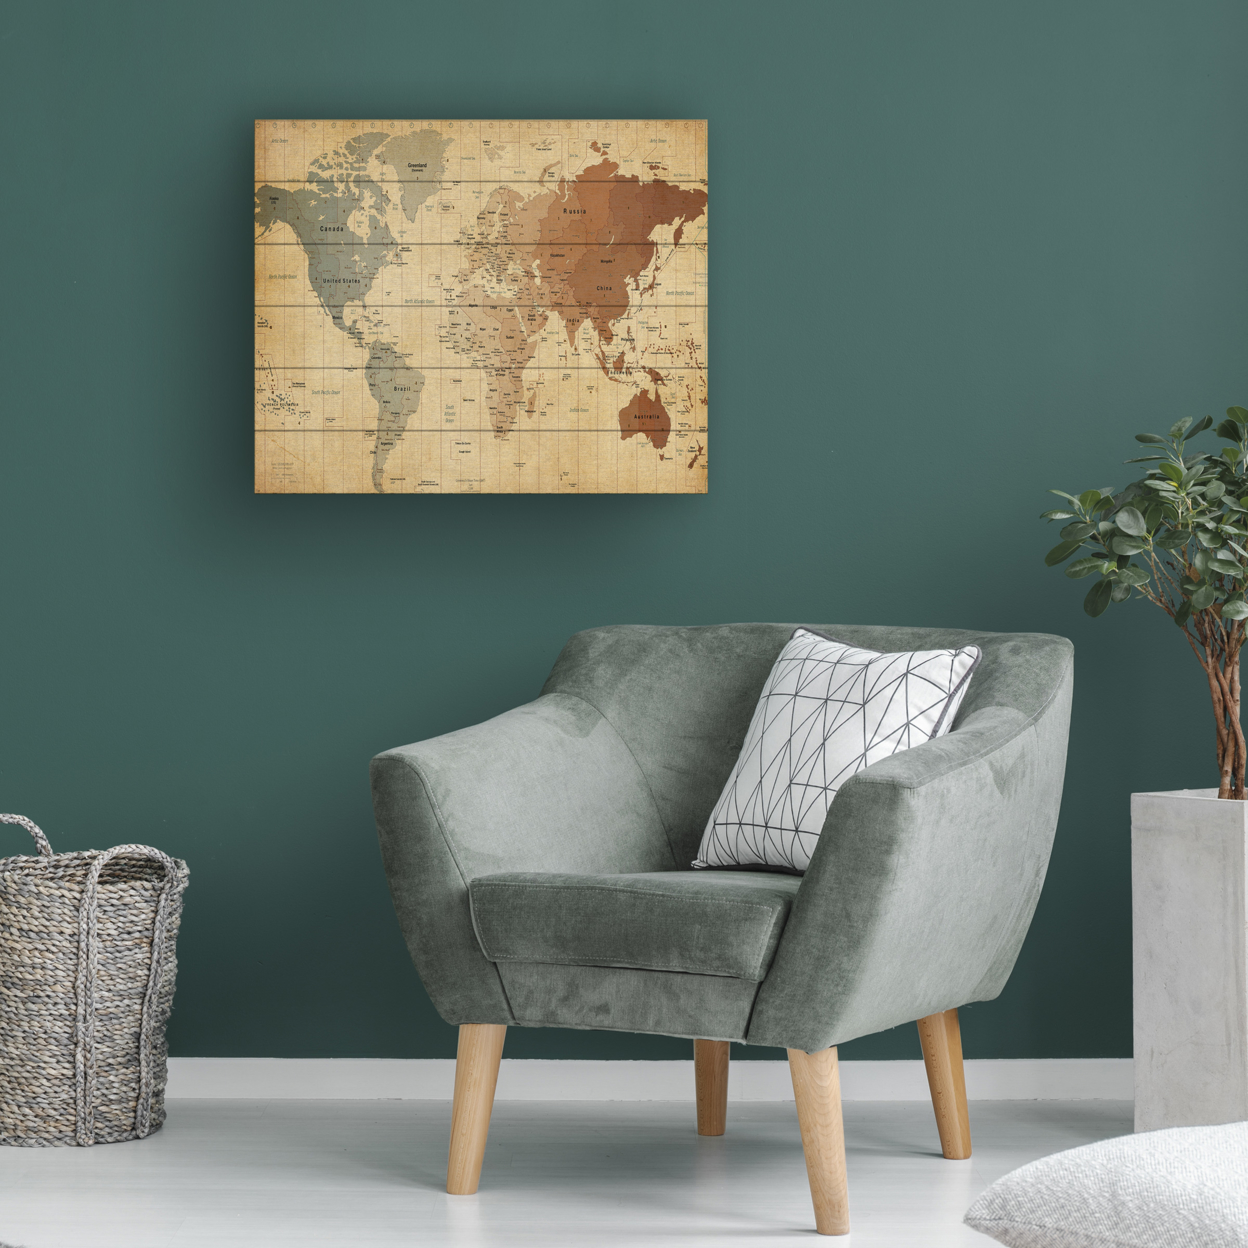 Wooden Slat Art 18 X 22 Inches Titled Time Zones Map Of The World Ready To Hang Home Decor Picture